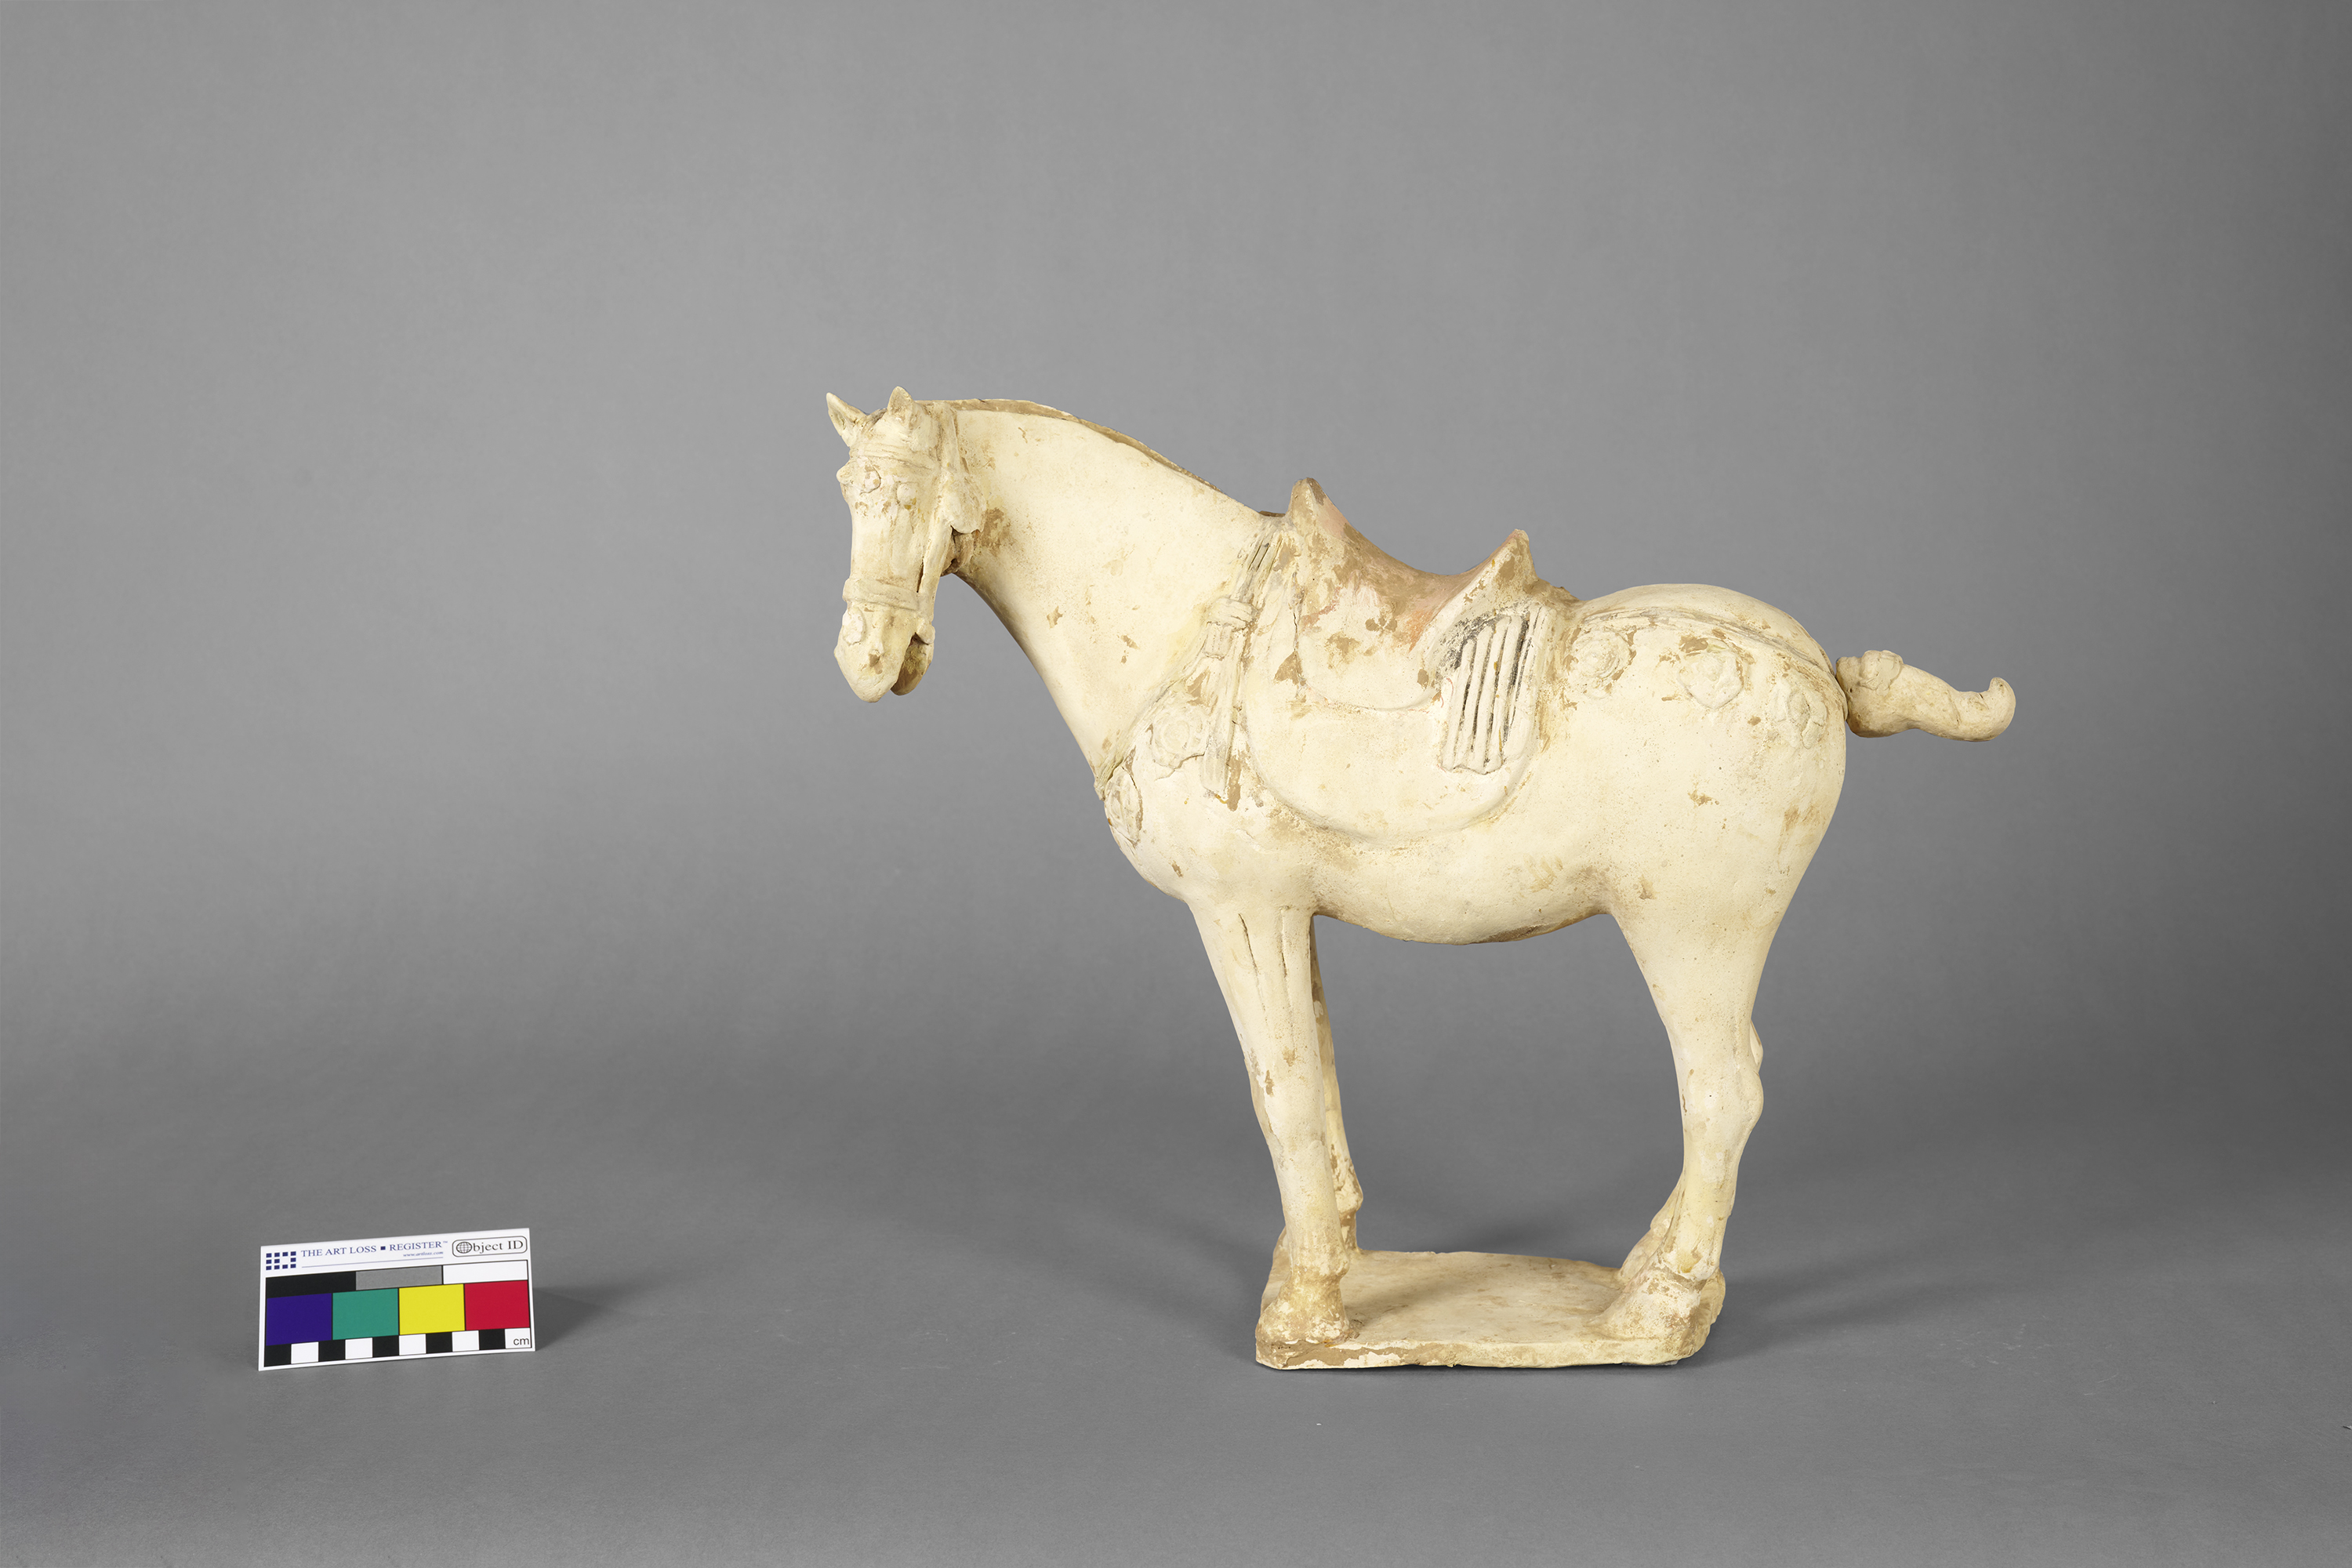 Horse statue from the Tang Dynasty. Photo: Flurin Bertschinger, NL